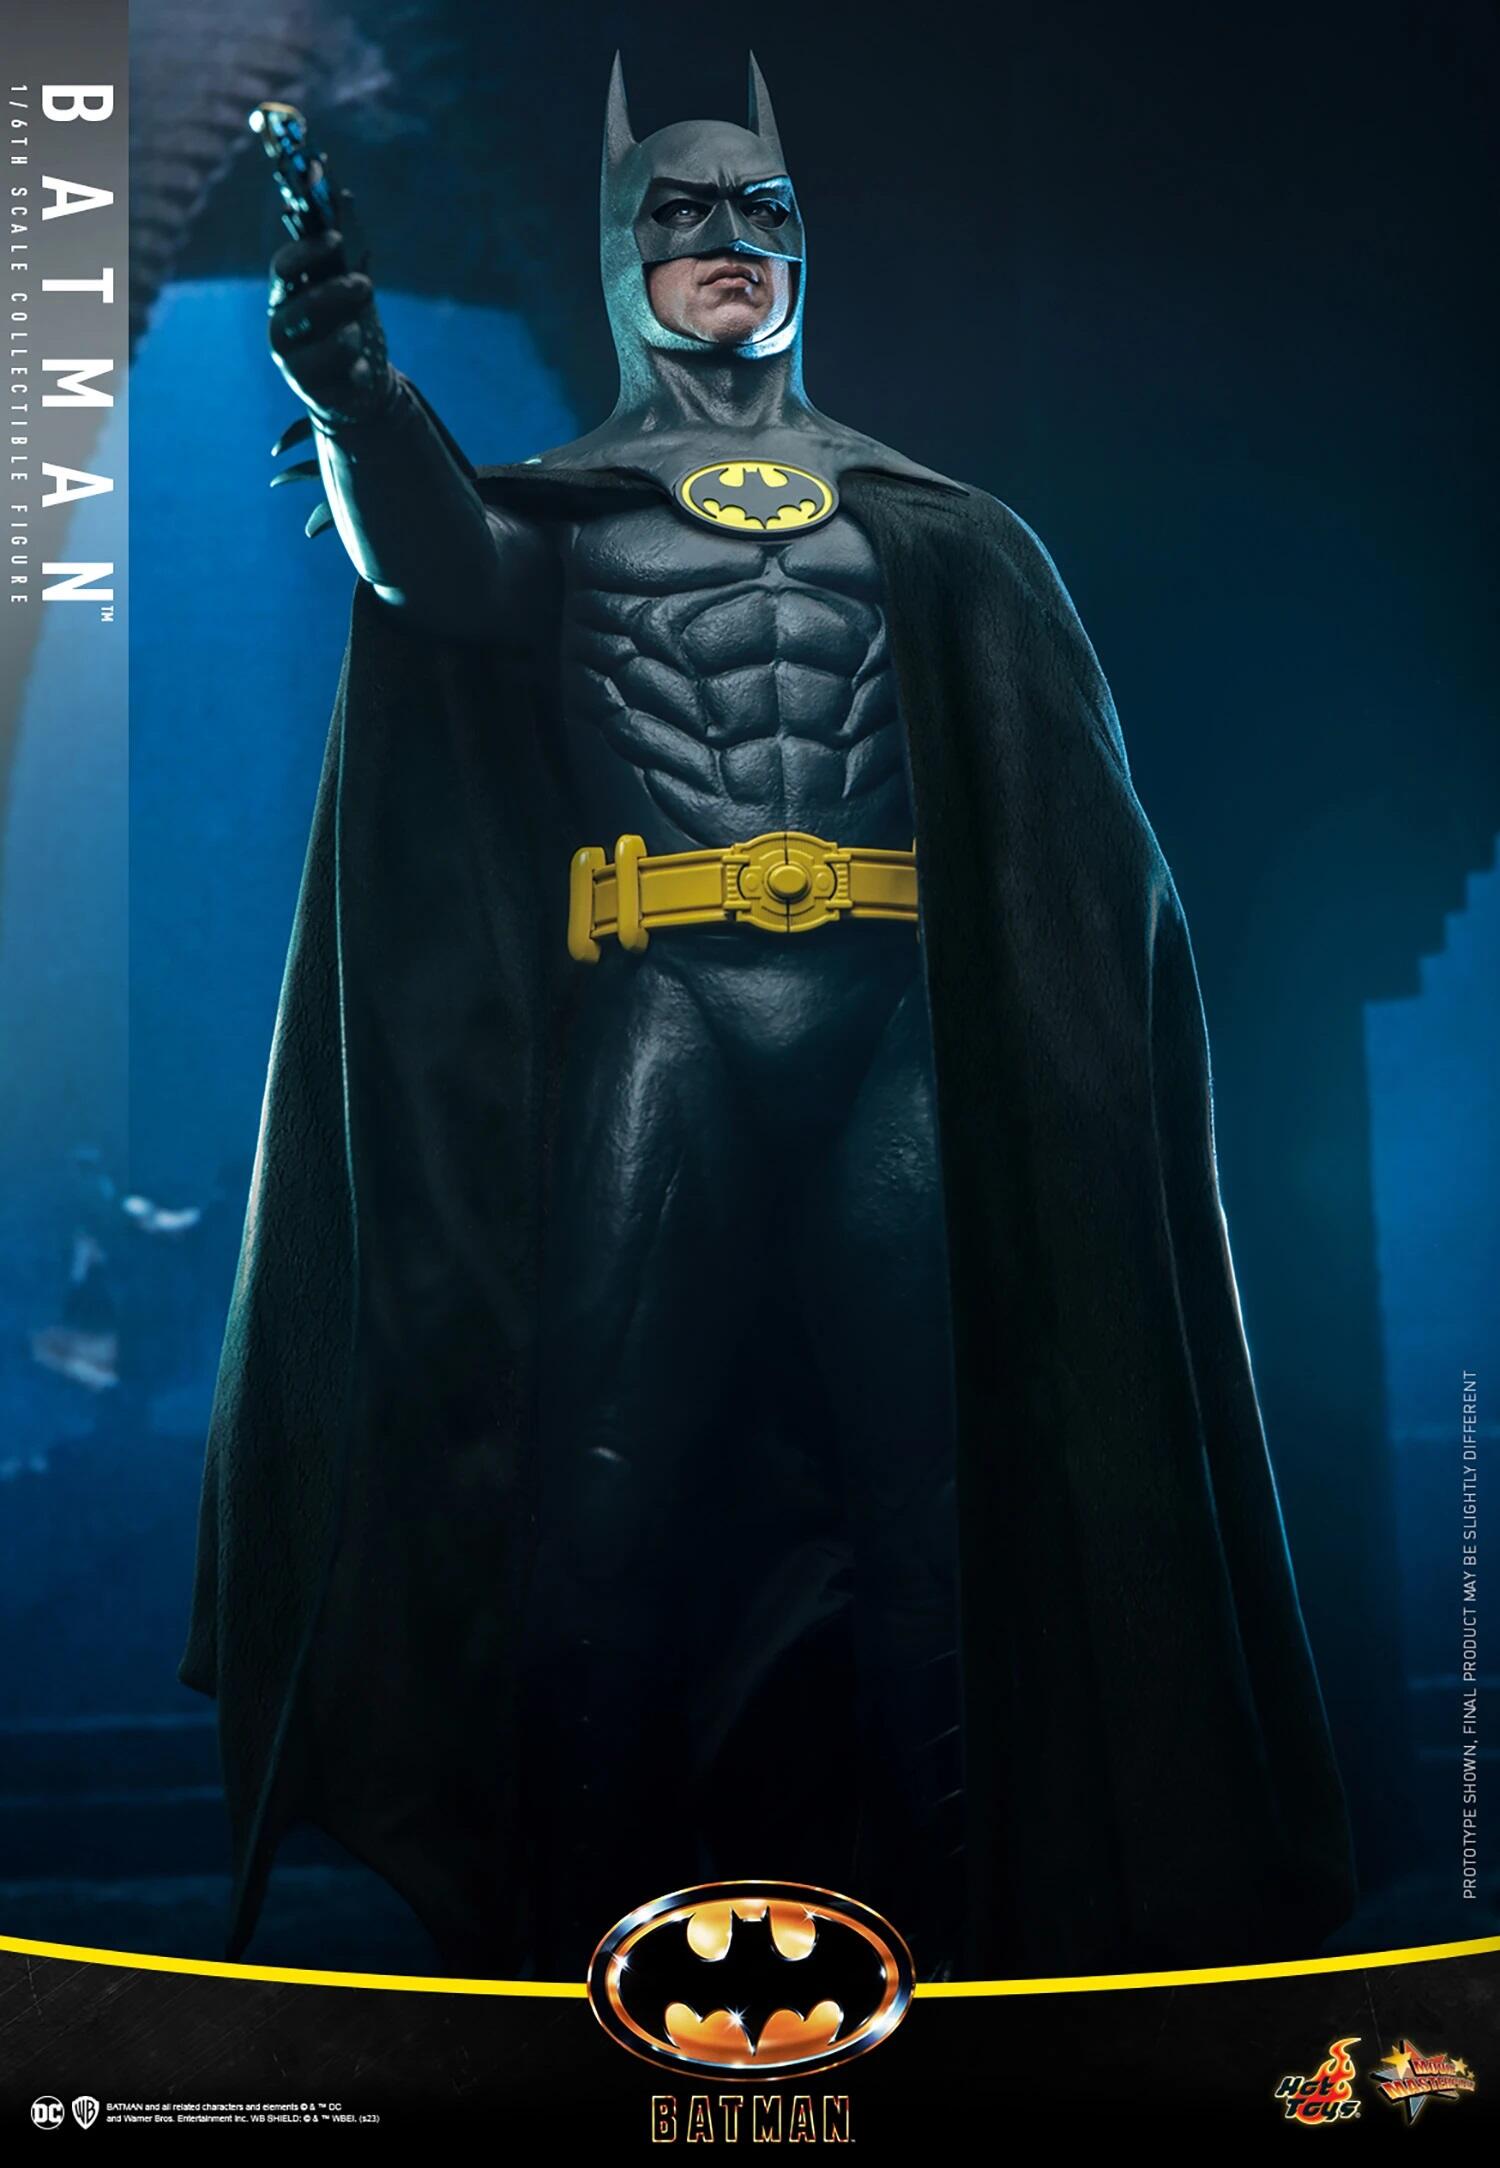 Batman Sixth Scale Figure By Hot Toys Sideshow Collectibles | lupon.gov.ph